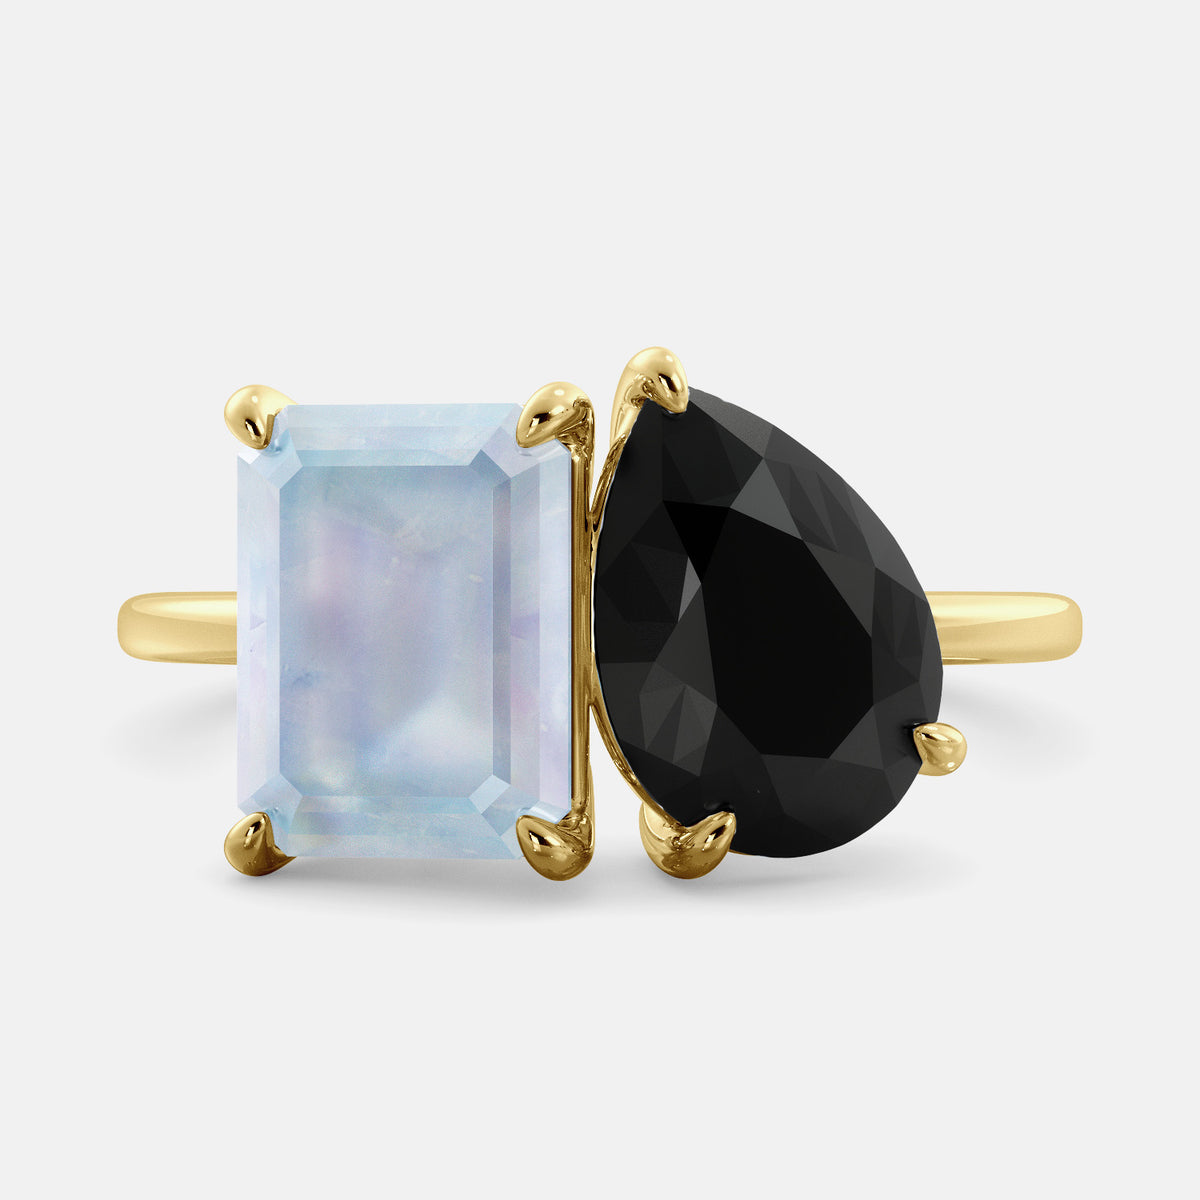 A toi et moi ring with one emerald cut moonstone and one pear cut onyx, set in 14k yellow gold. The moonstone is a soft blue-green color, and the ruby is a deep red. The two stones are set side by side, creating a beautiful contrast of colors. The ring is made of 14k yellow gold and has a polished finish. It is a perfect symbol of love and commitment.